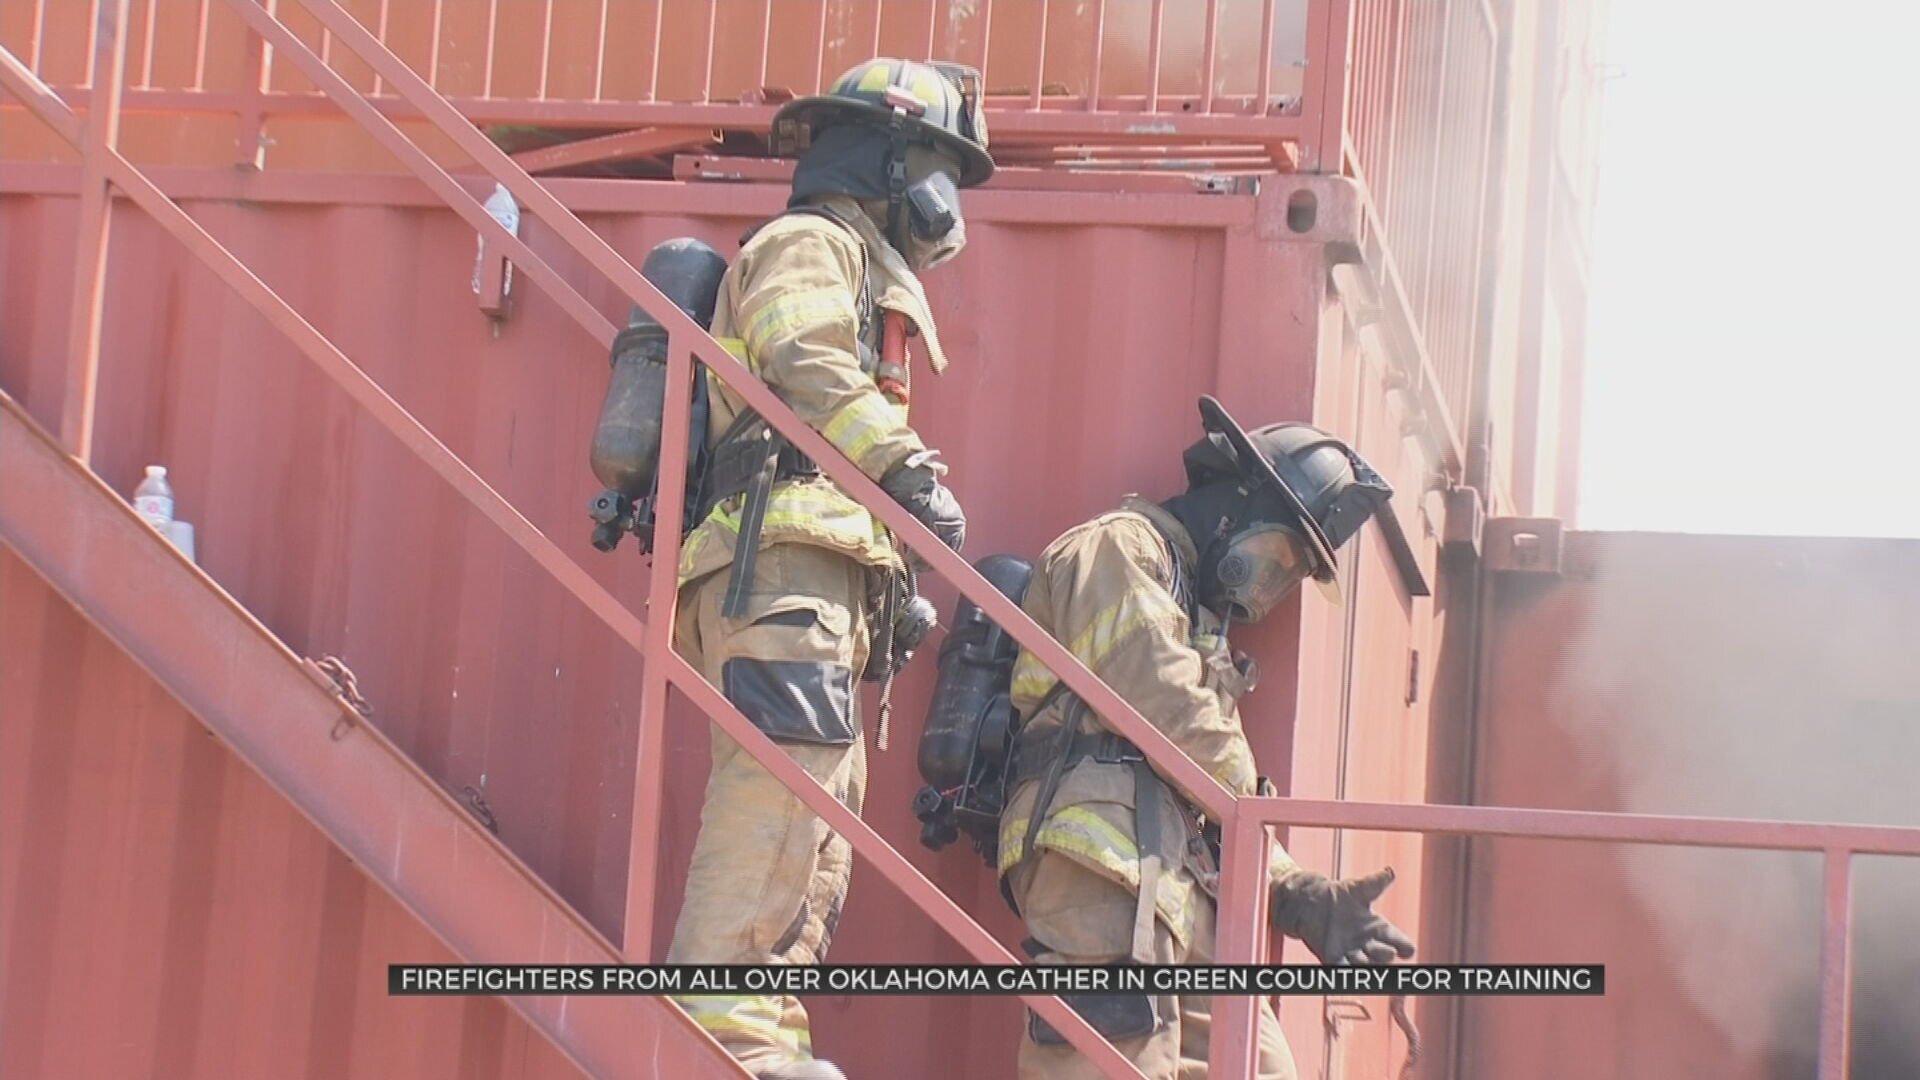 Firefighters From Across Oklahoma Gather In Green Country For Training